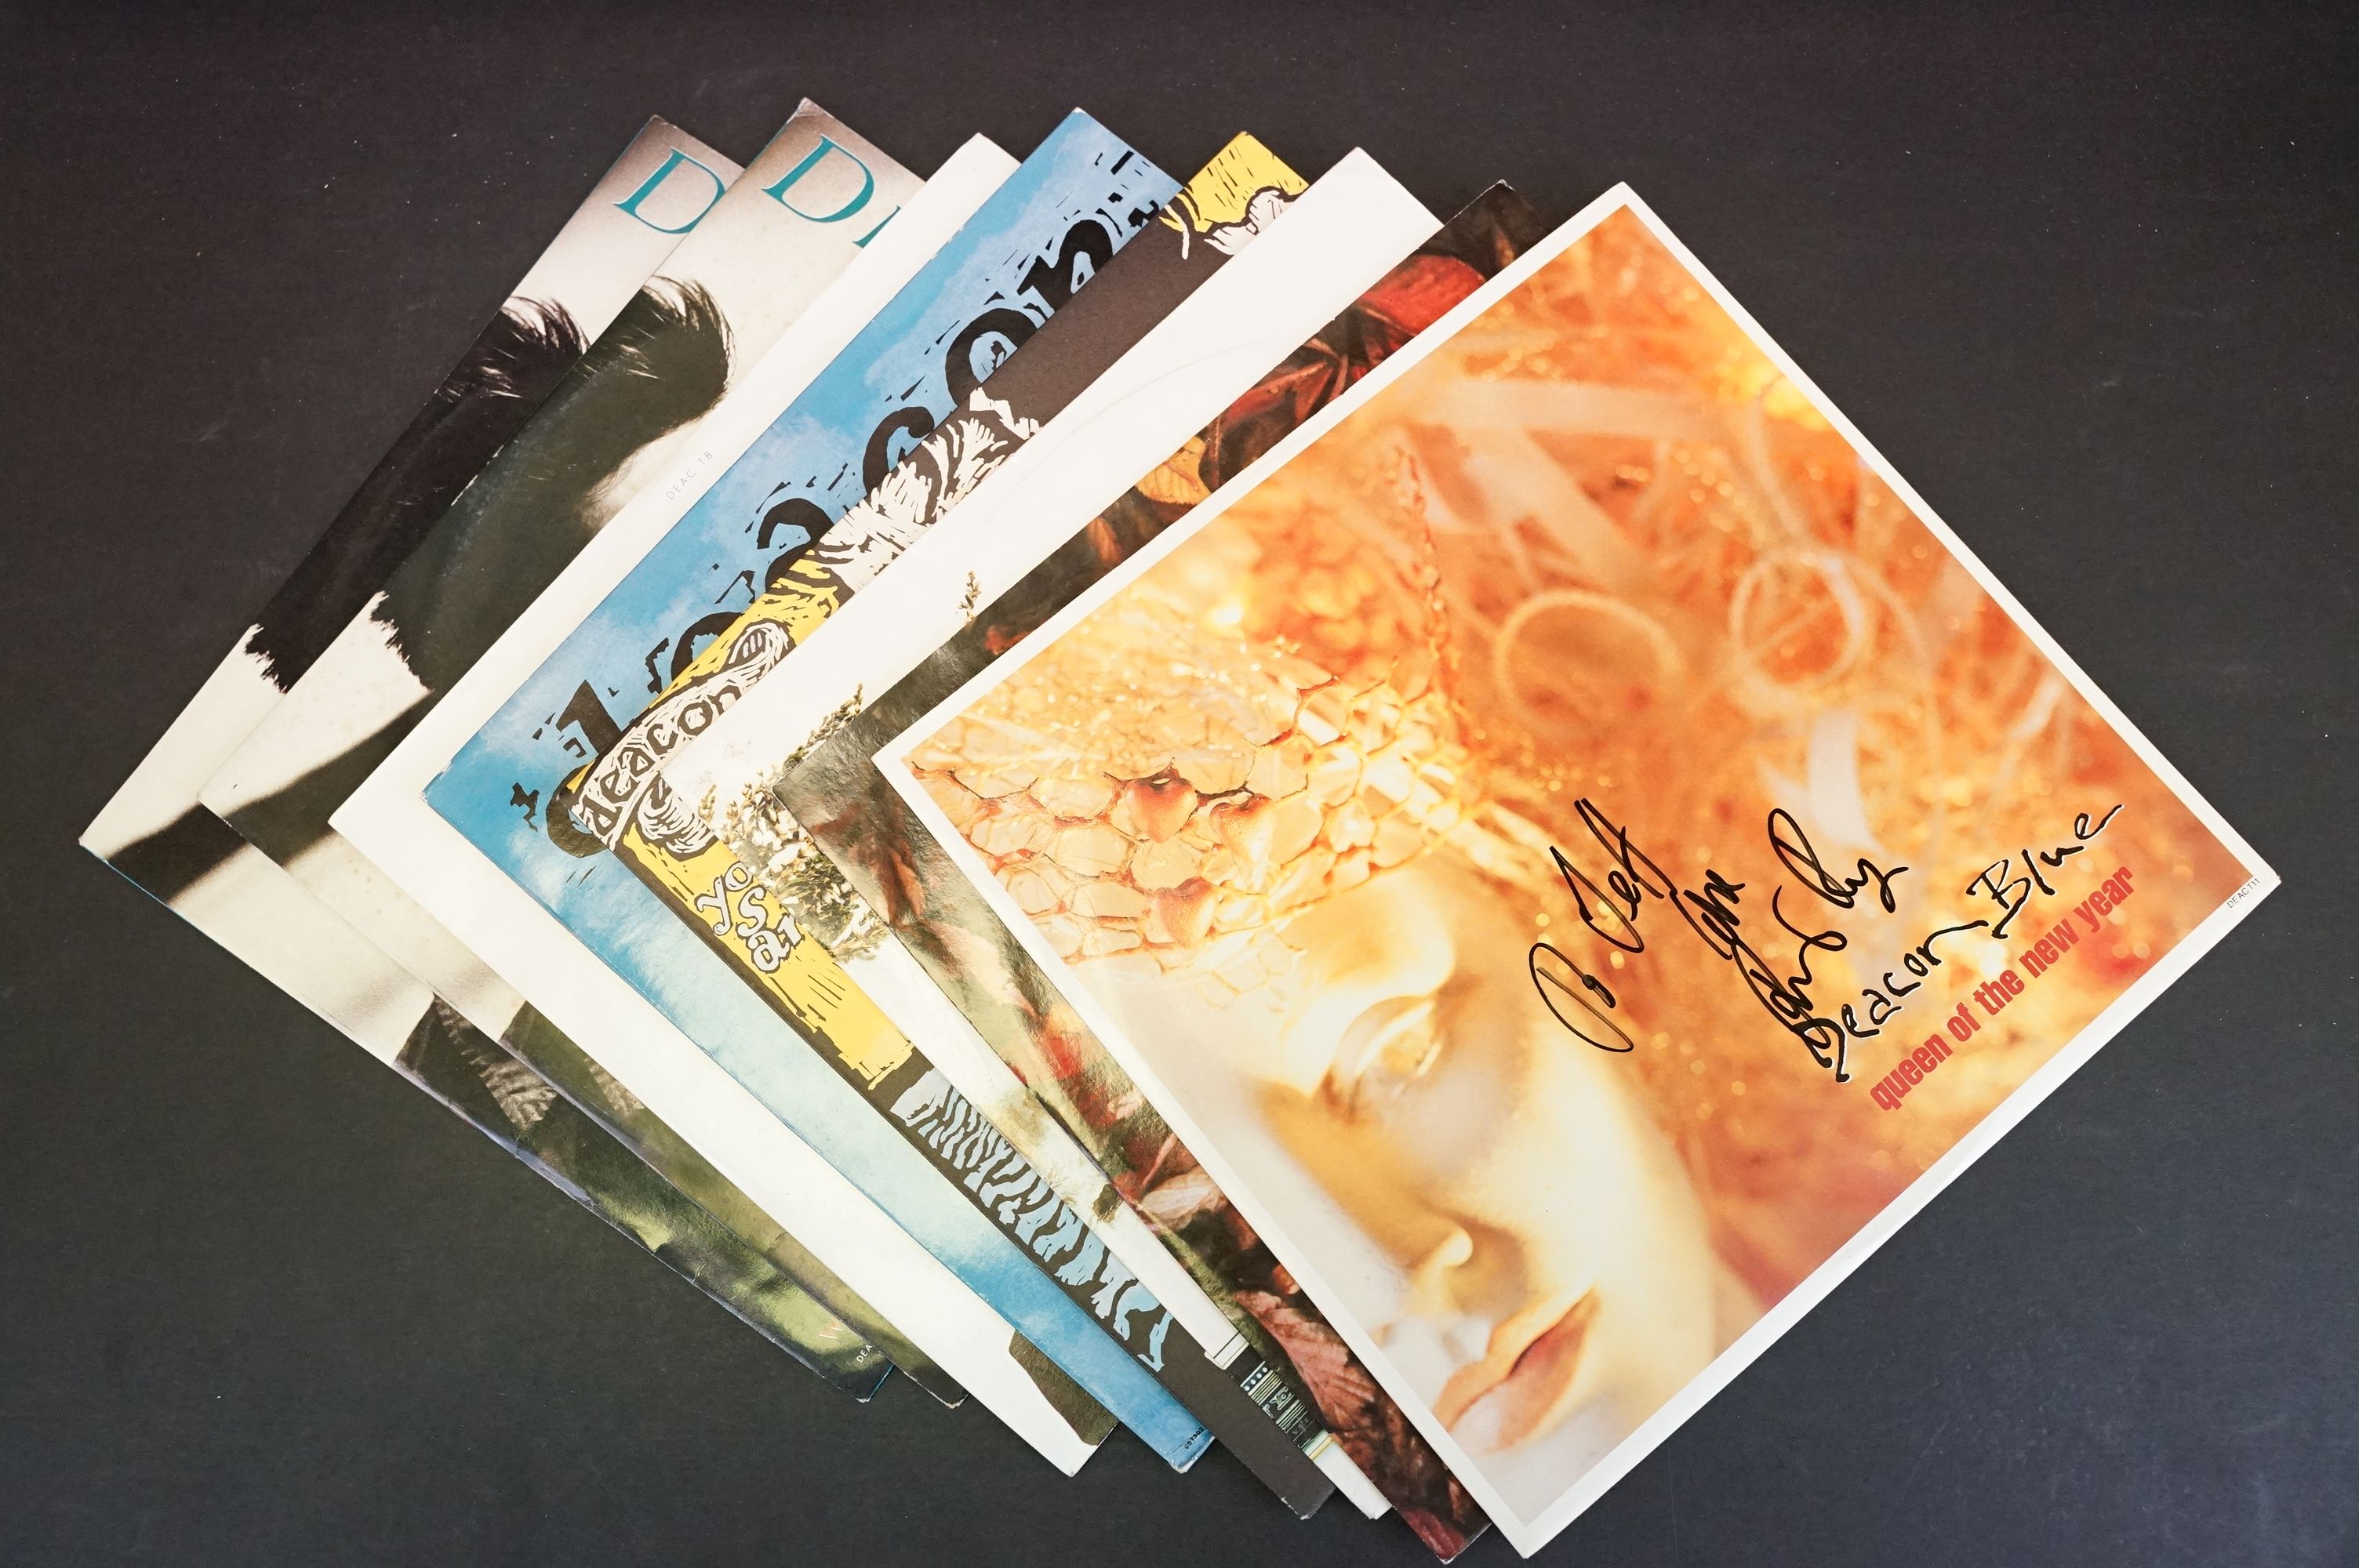 Vinyl / Autographs - 4 albums, 16 x 12” singles and 4 x 10” by Deacon Blue, all signed by Ricky Ross - Image 4 of 5